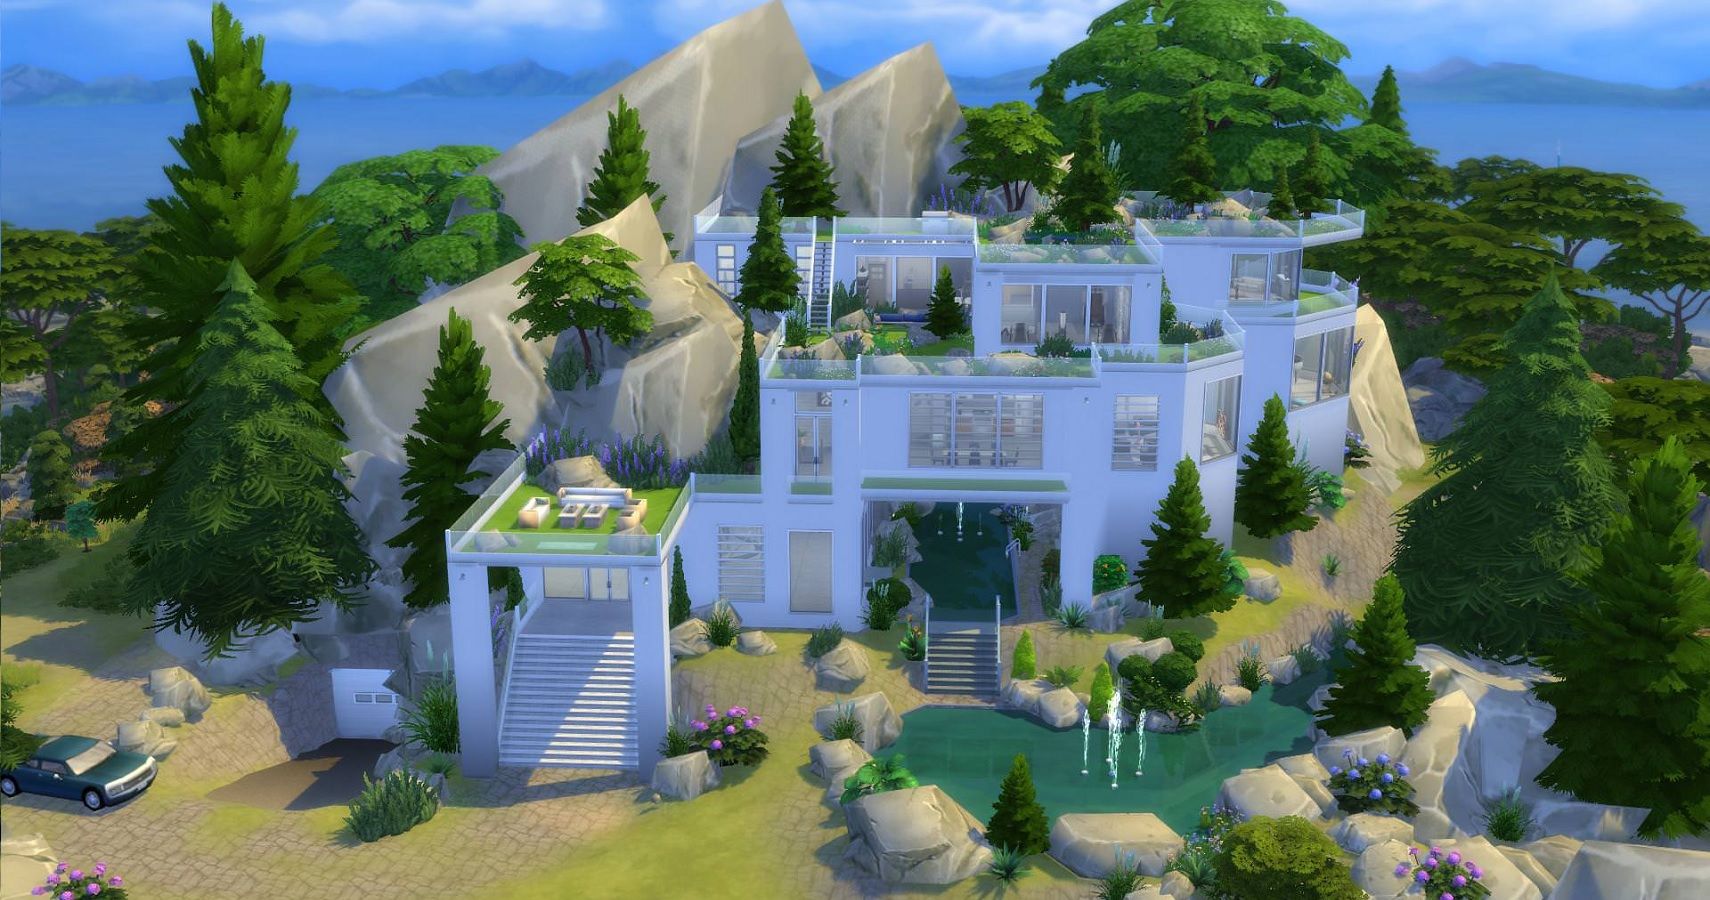 15 The Sims 4 Mansions That Are Too Unreal